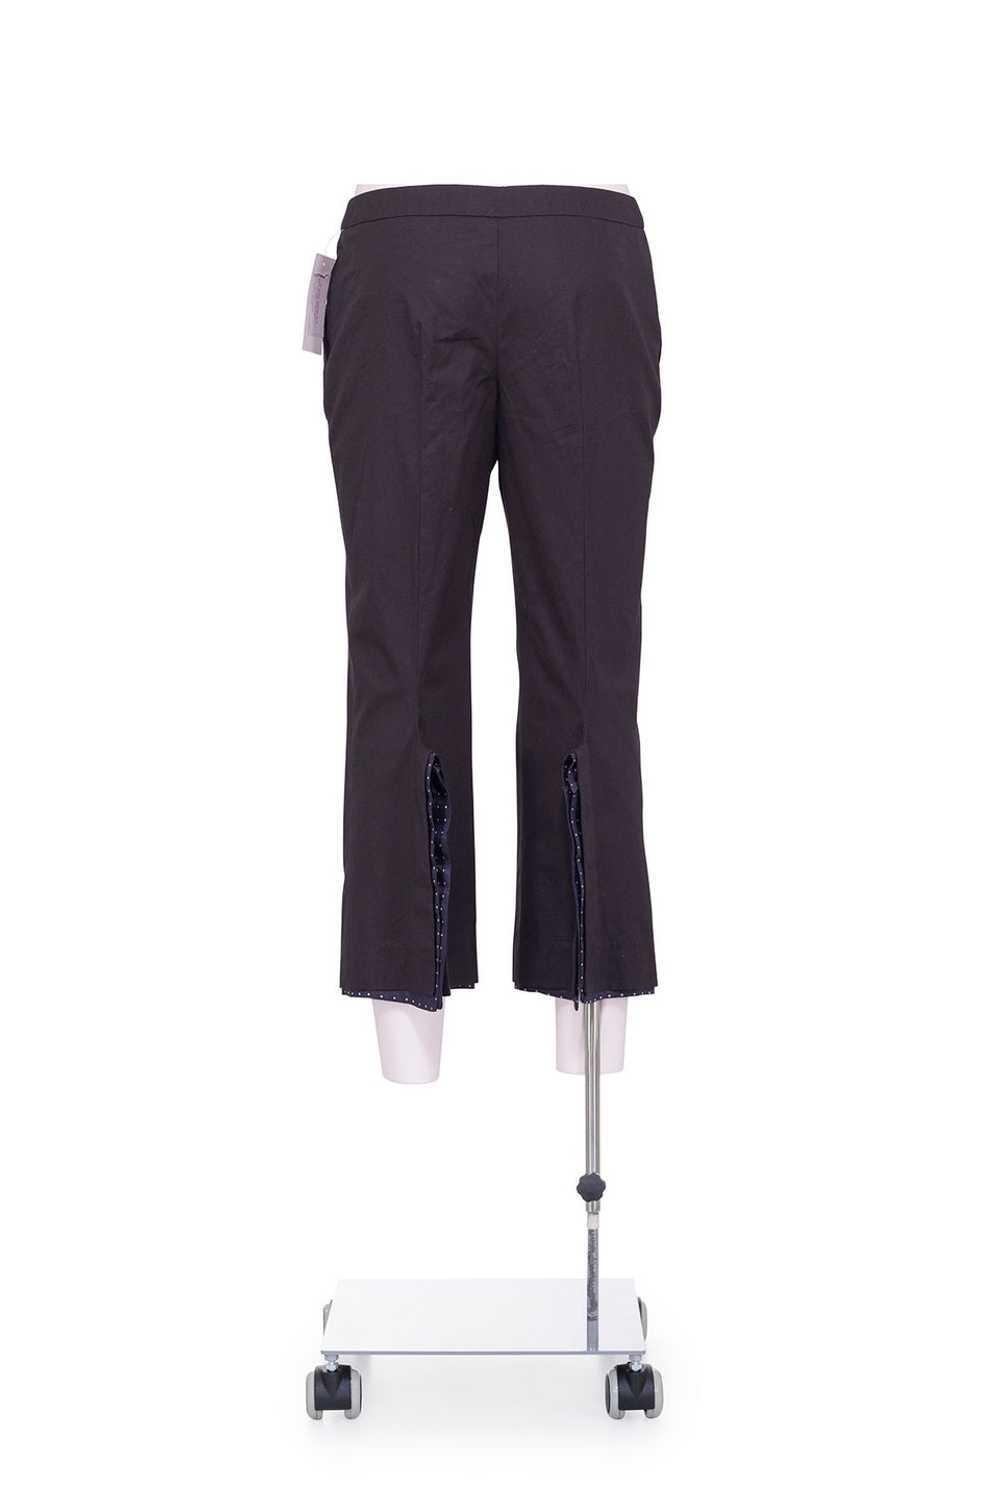 ALEXANDER MCQUEEN LOW RISE CROPPED TROUSERS - image 4